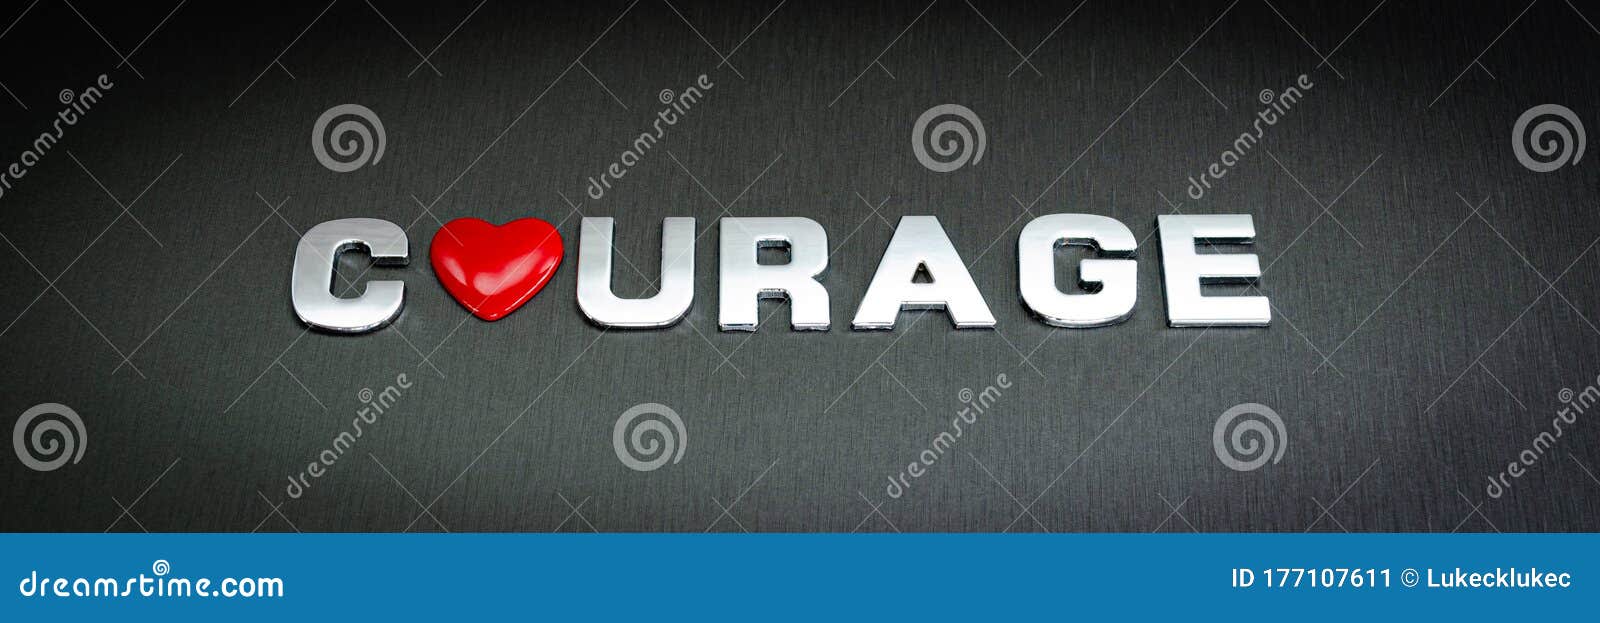 Word Courage Spelled with Red Heart Shape Replacing Letter O in a ...